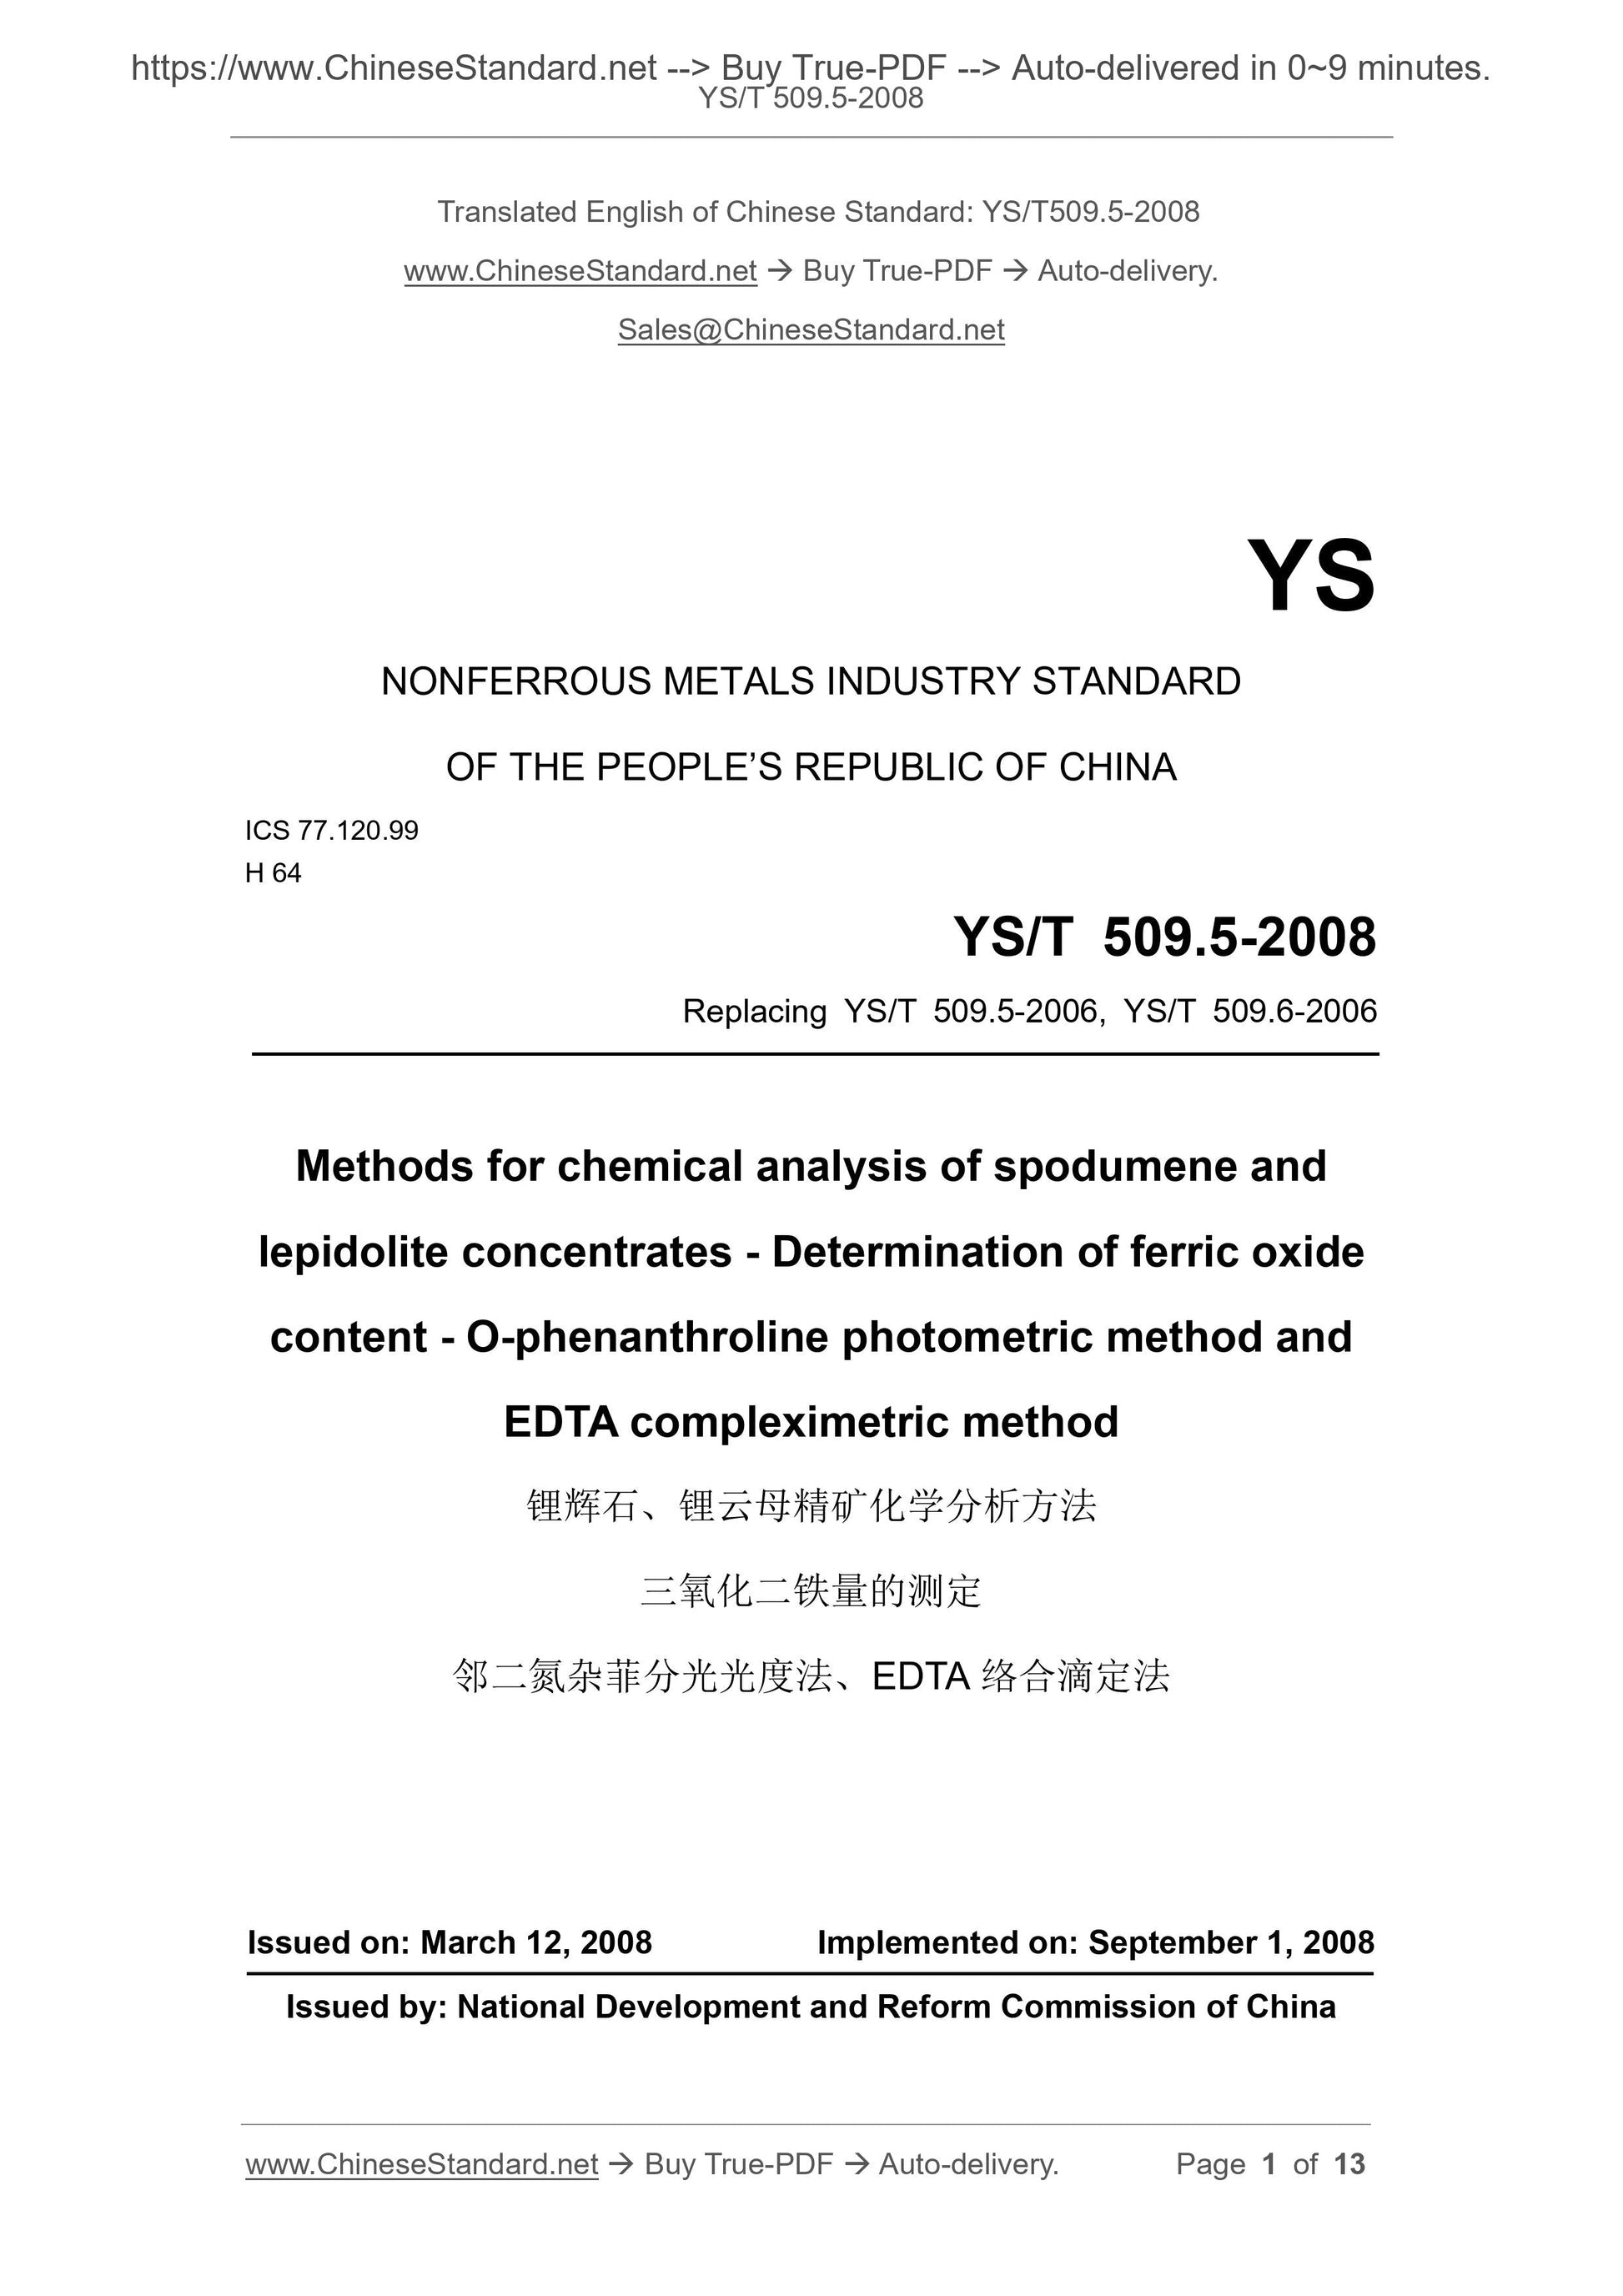 YS/T 509.5-2008 Page 1